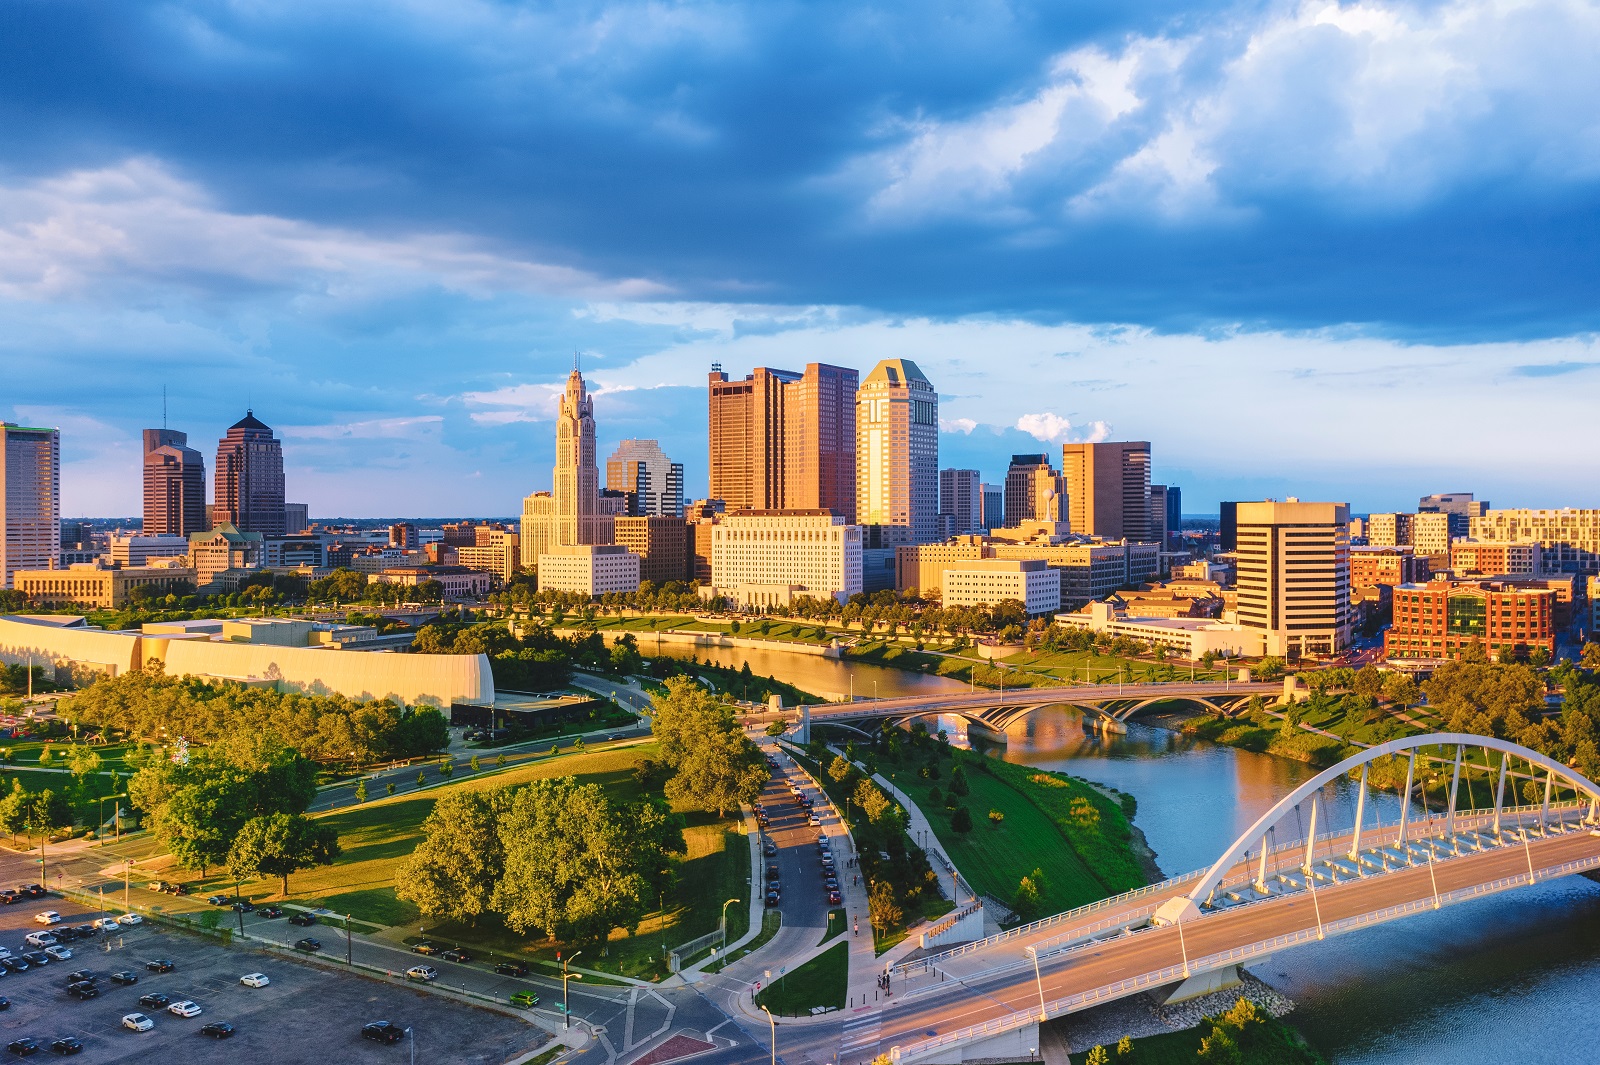 <p class="wp-caption-text">Image Credit: Shutterstock / Agnieszka Gaul</p>  <p><span>Columbus features an extensive highway system that helps prevent serious congestion, making it easy for drivers to get around quickly.</span></p>